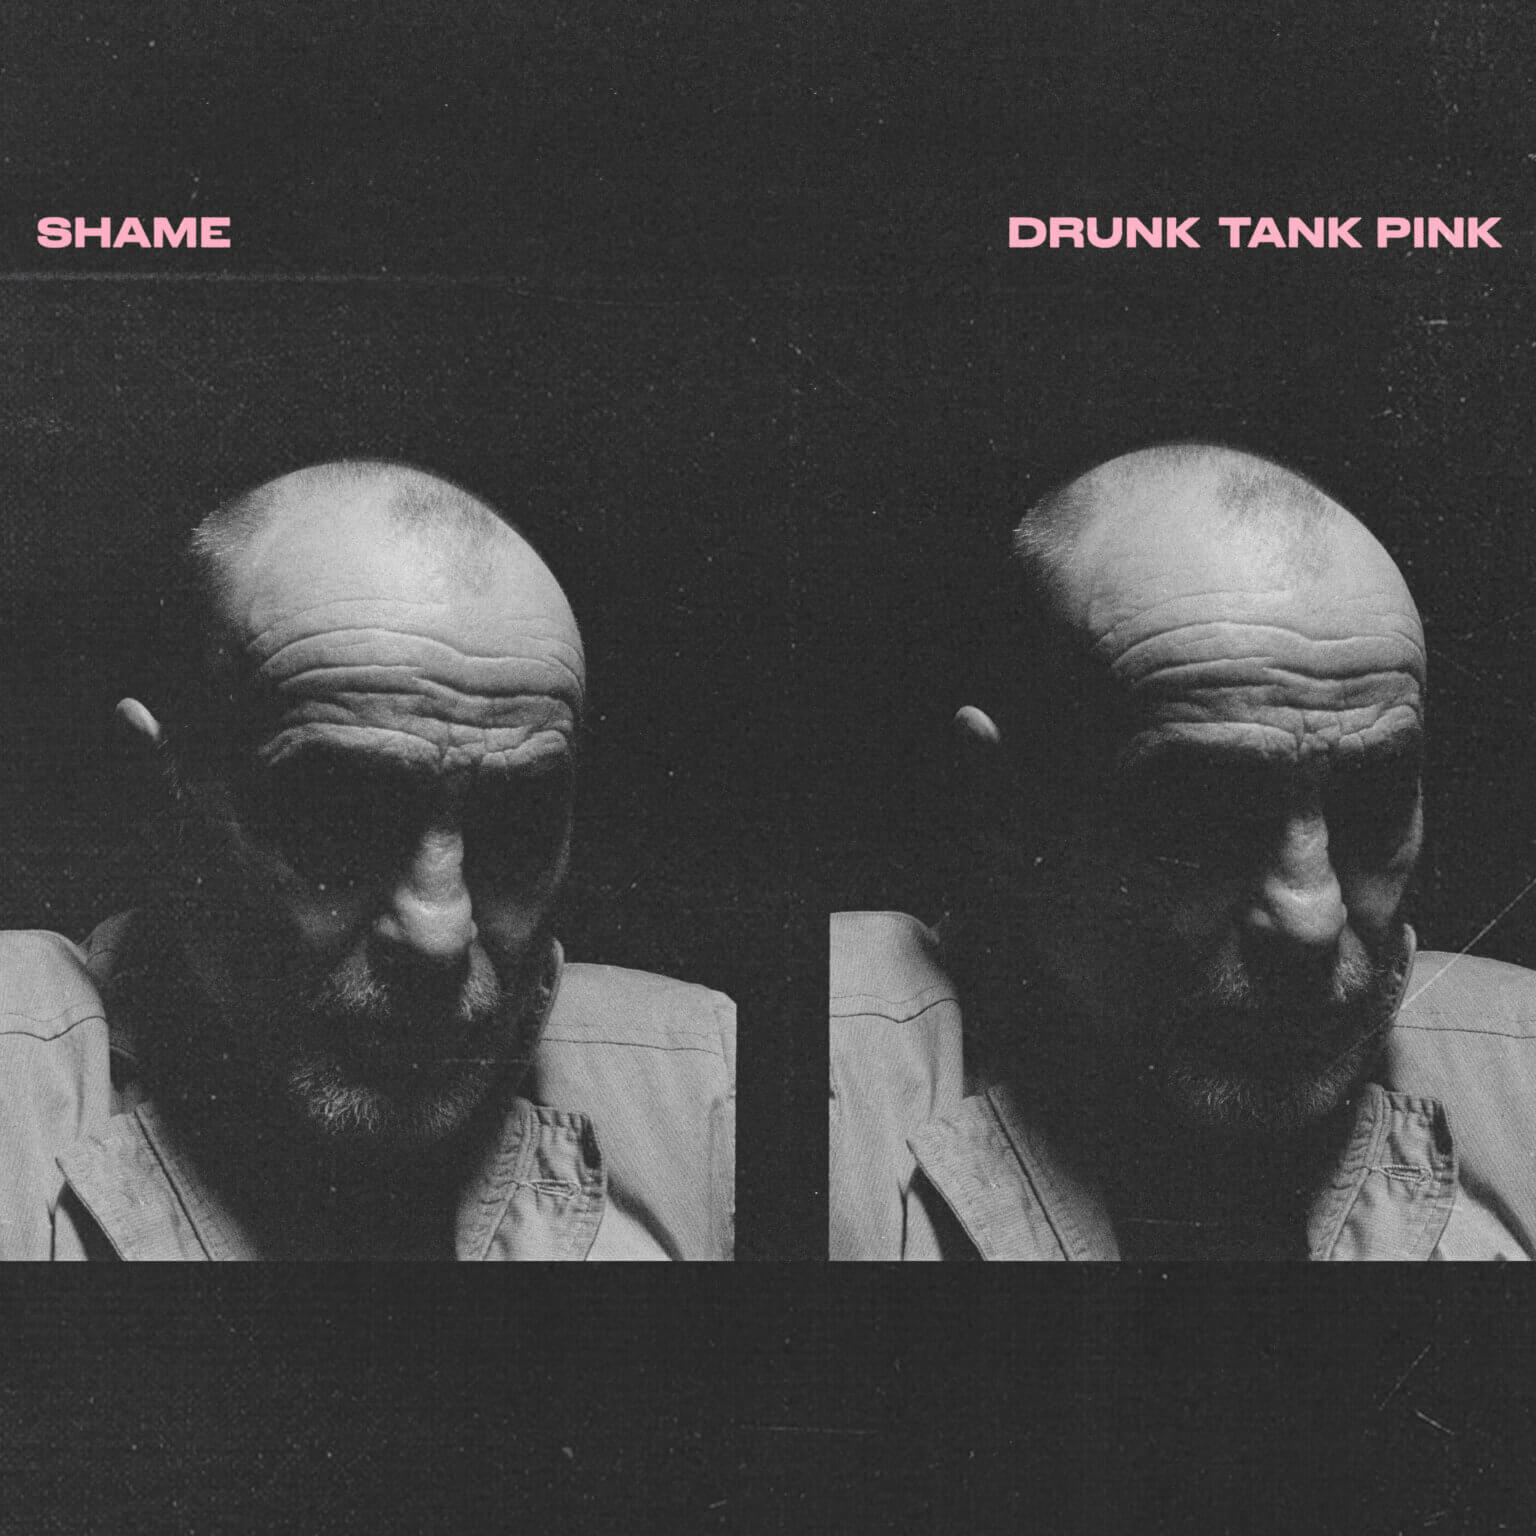 Shame has announced their new full-length Drunk Pink Tank LP, will be released on January 15th via Dead Oceans